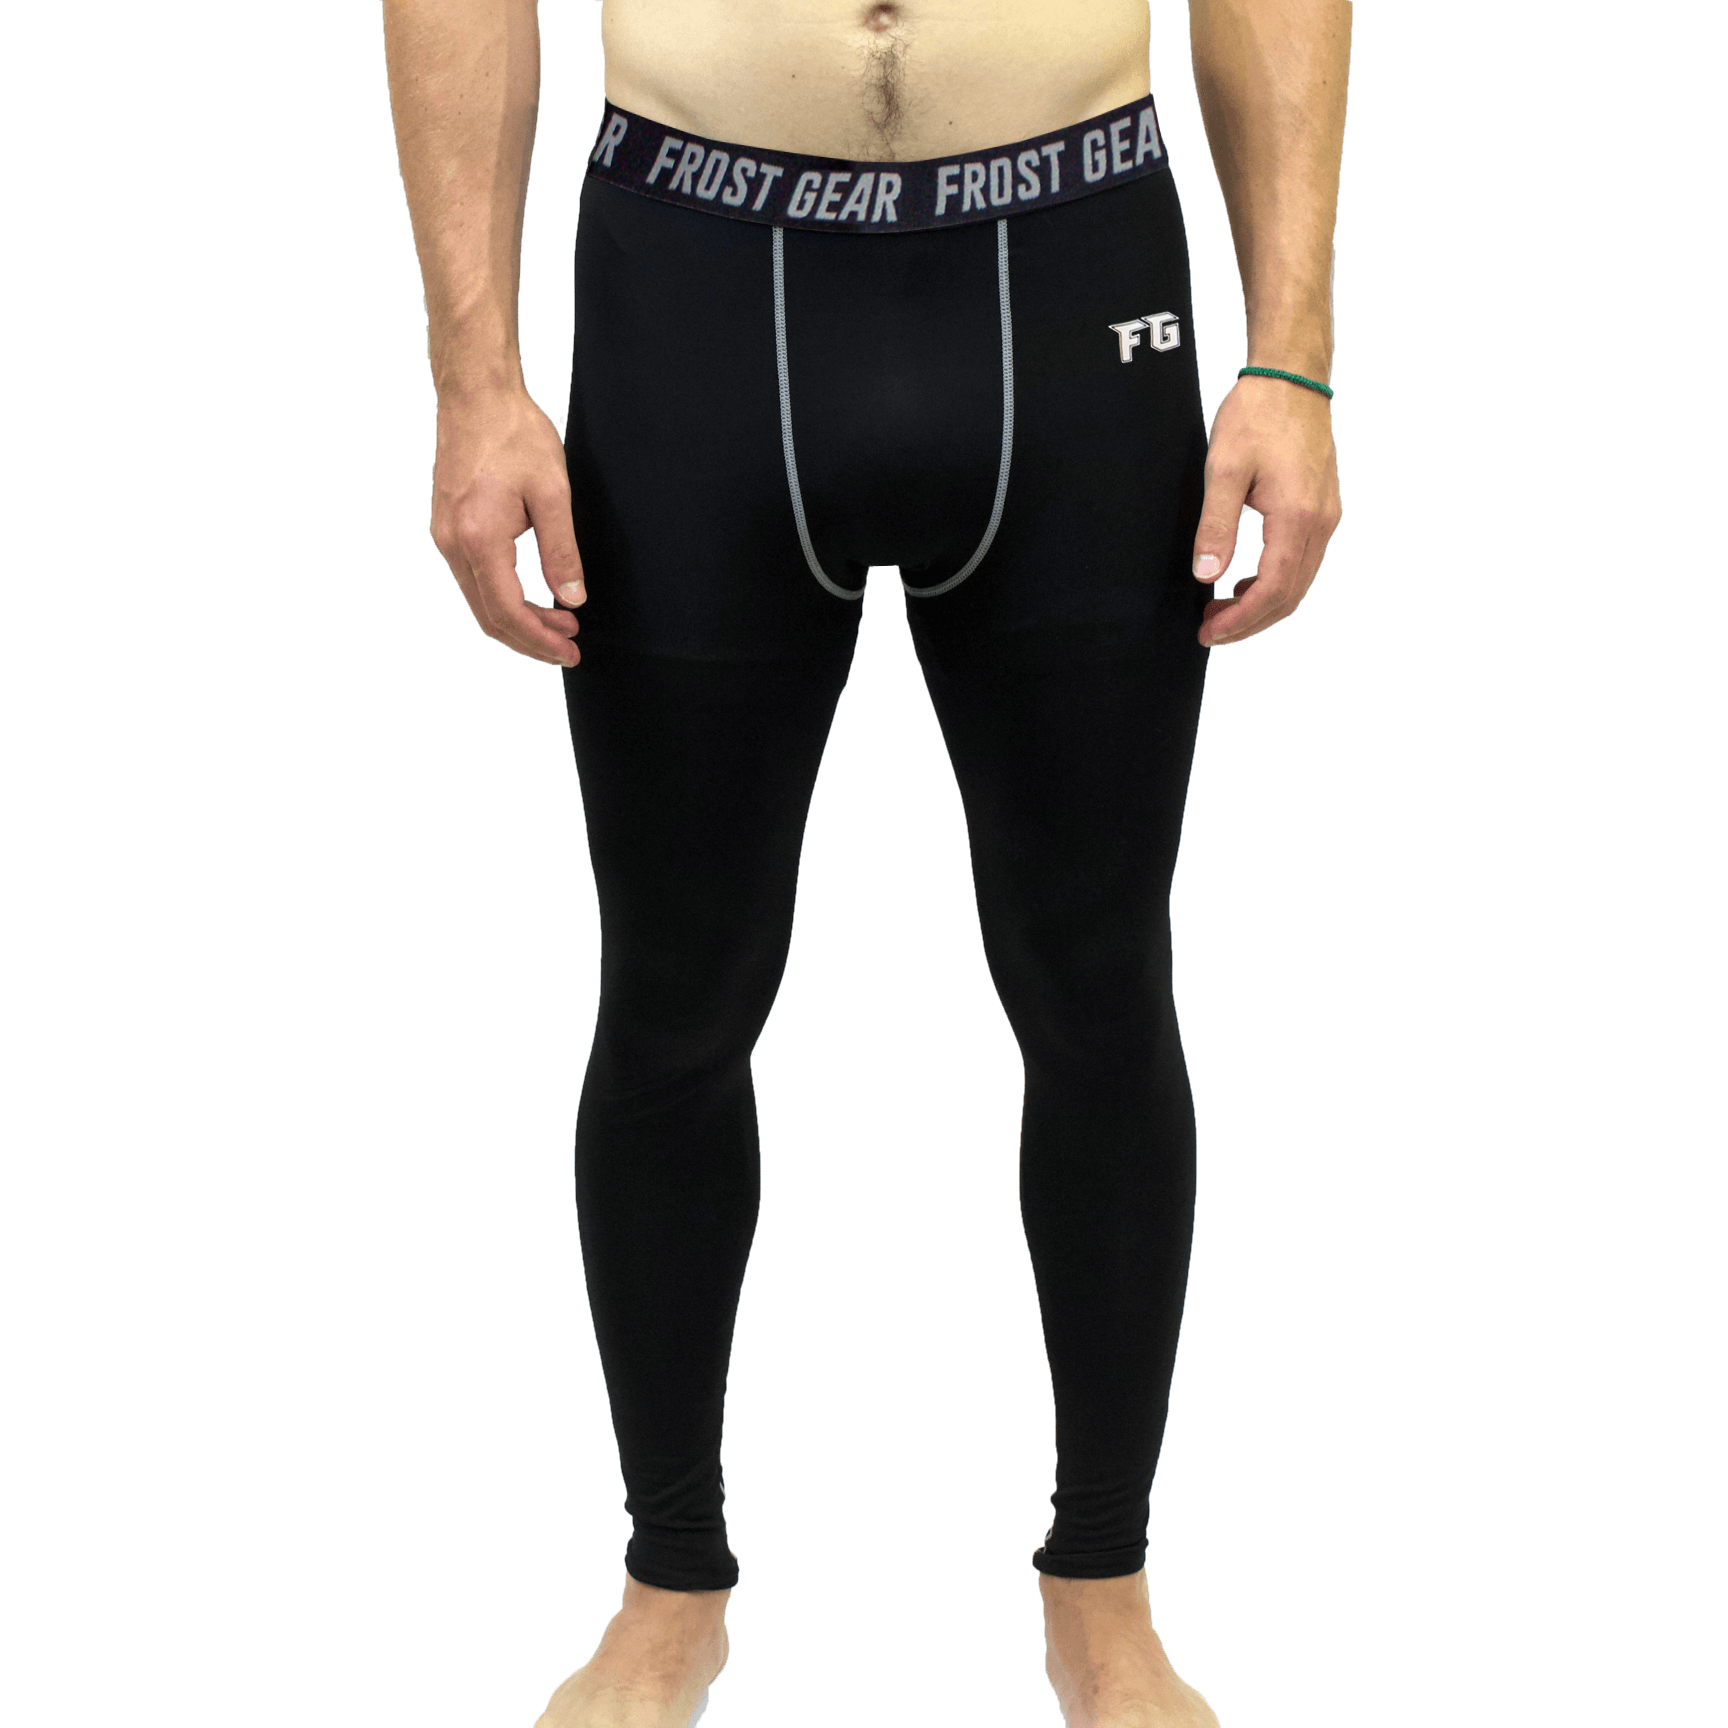 Shop Pro Combat Compression Leggings with great discounts and